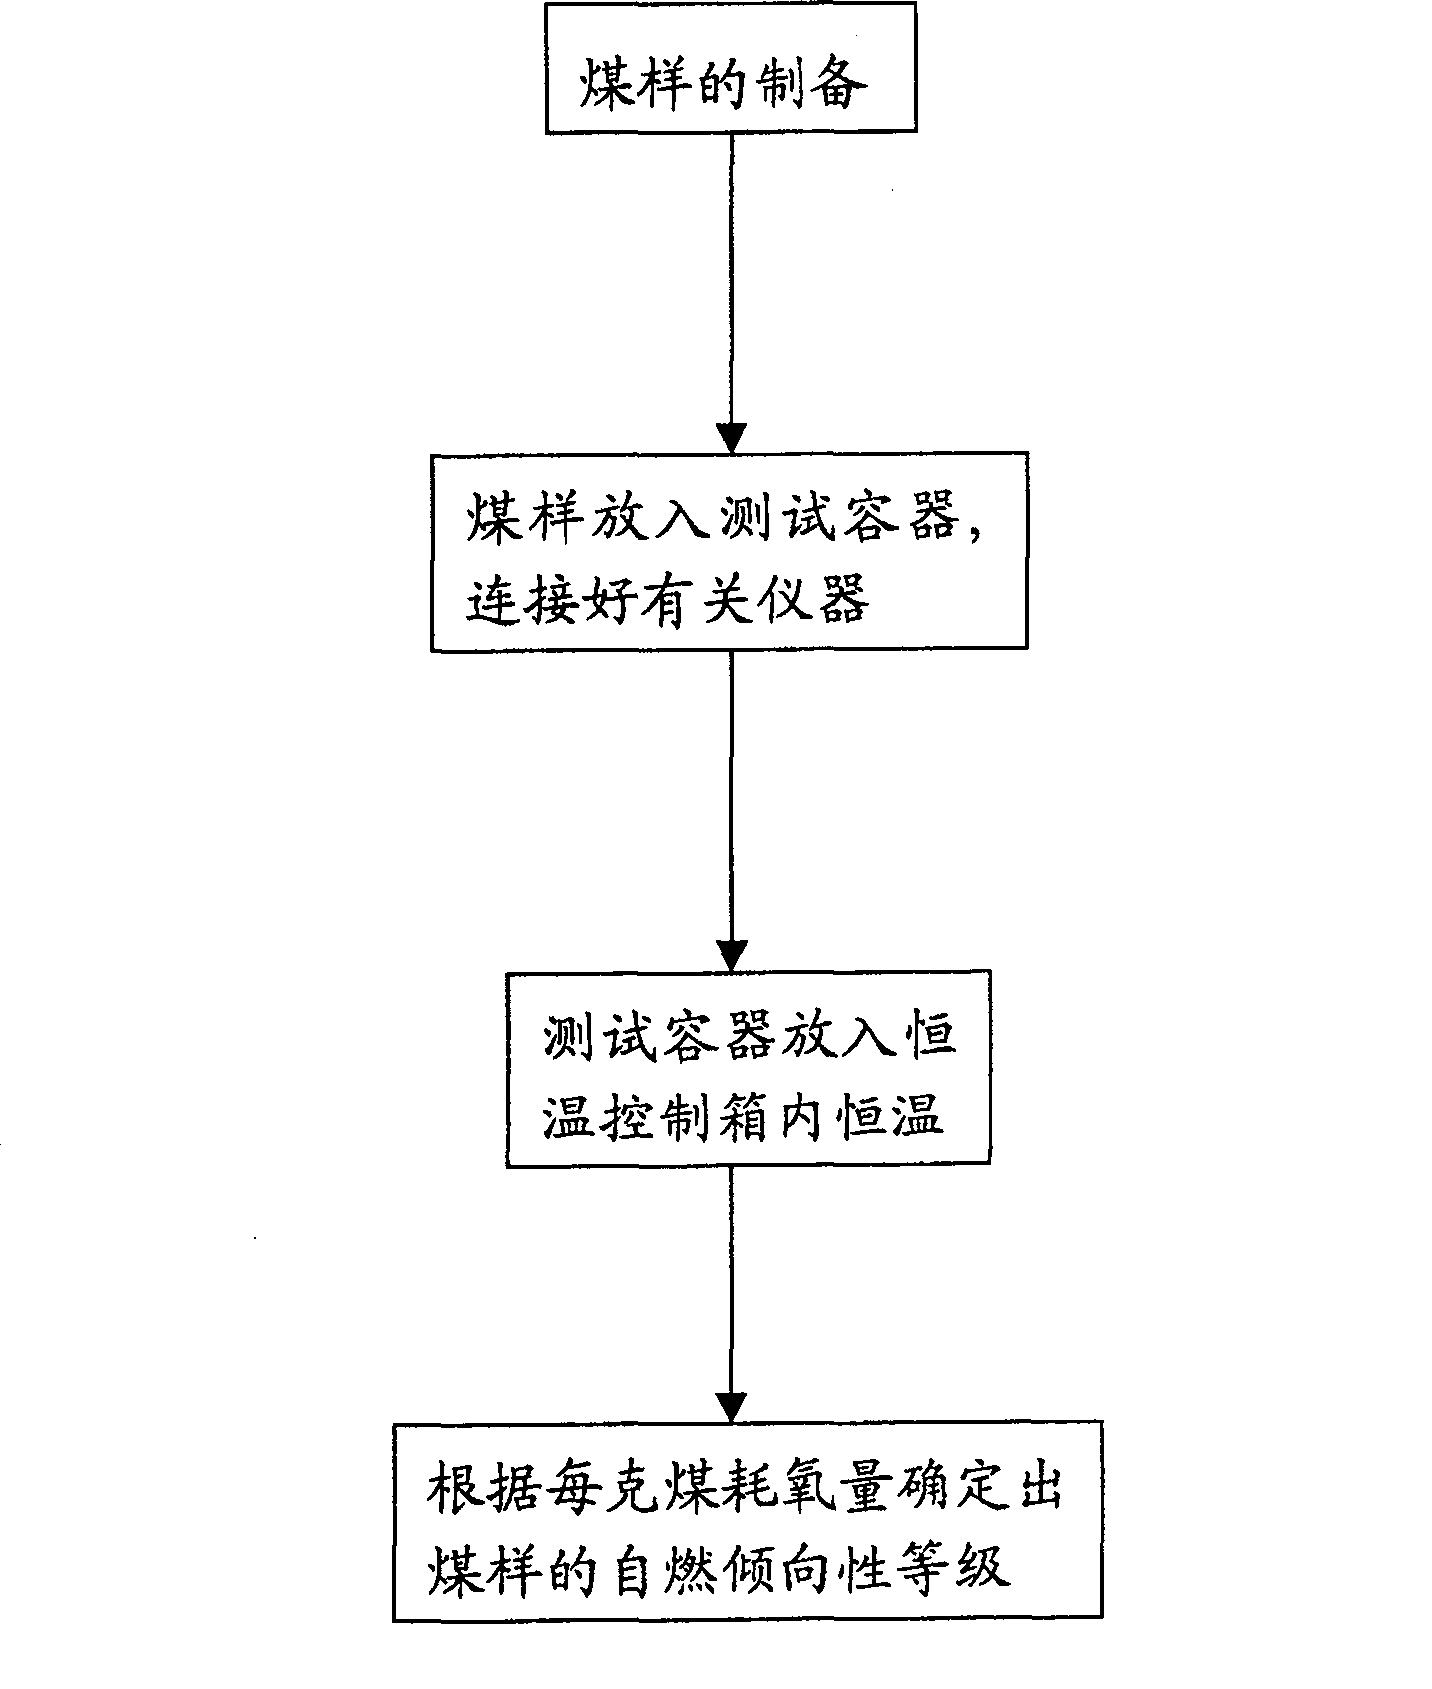 Method for identifying coal self-combustion tendentiousness based on low temp oxidation oxygen consumption